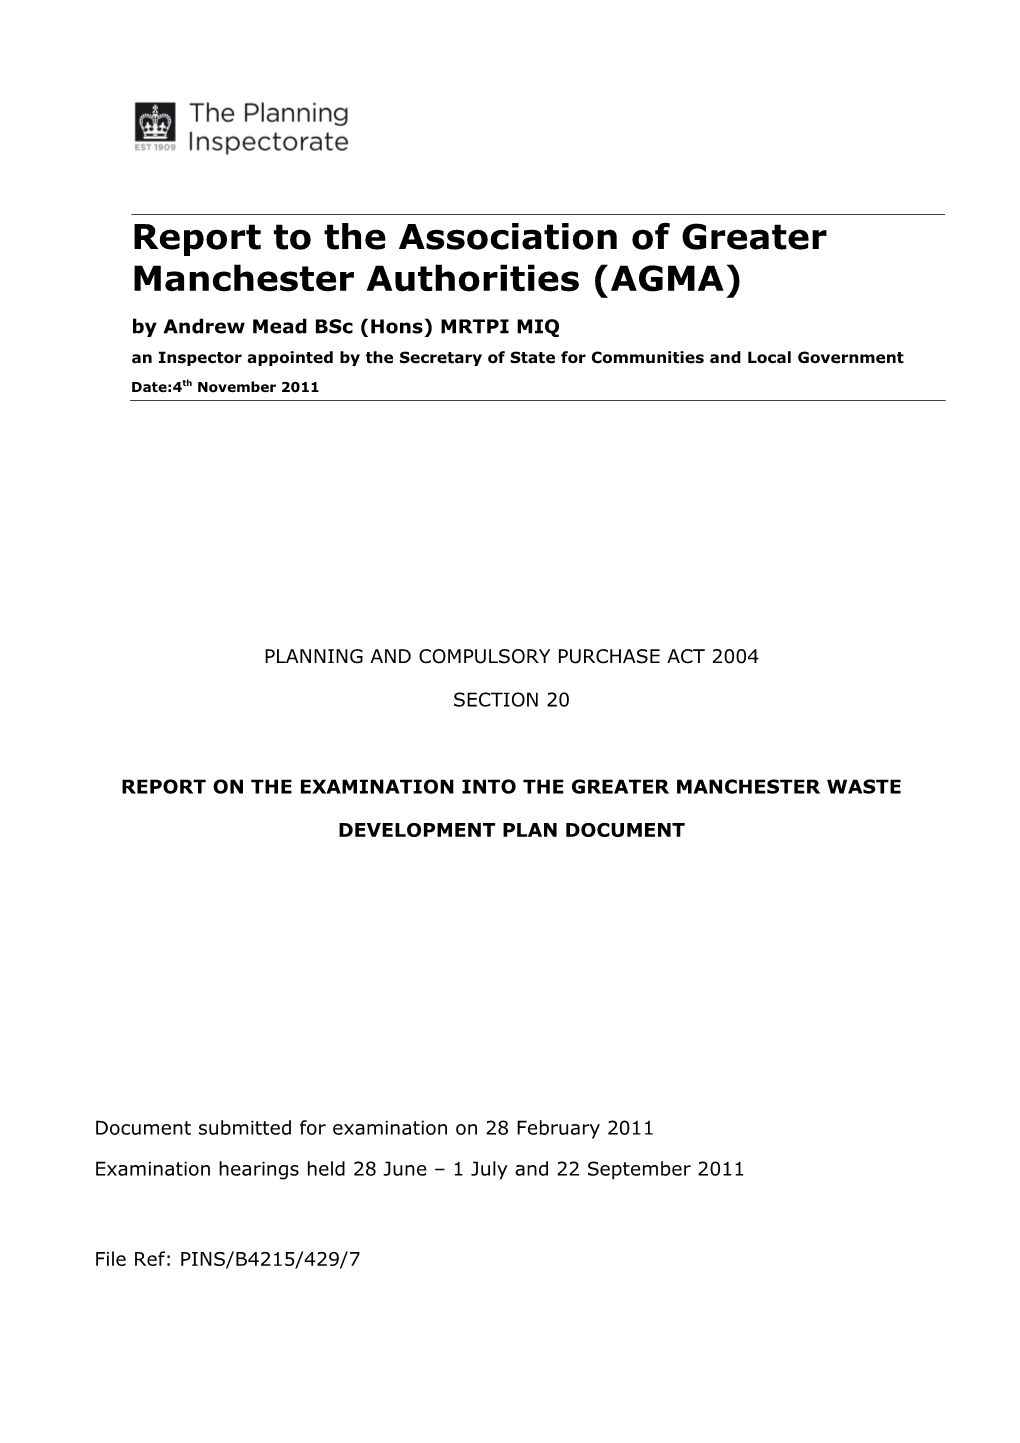 Report to the Association of Greater Manchester Authorities (AGMA)